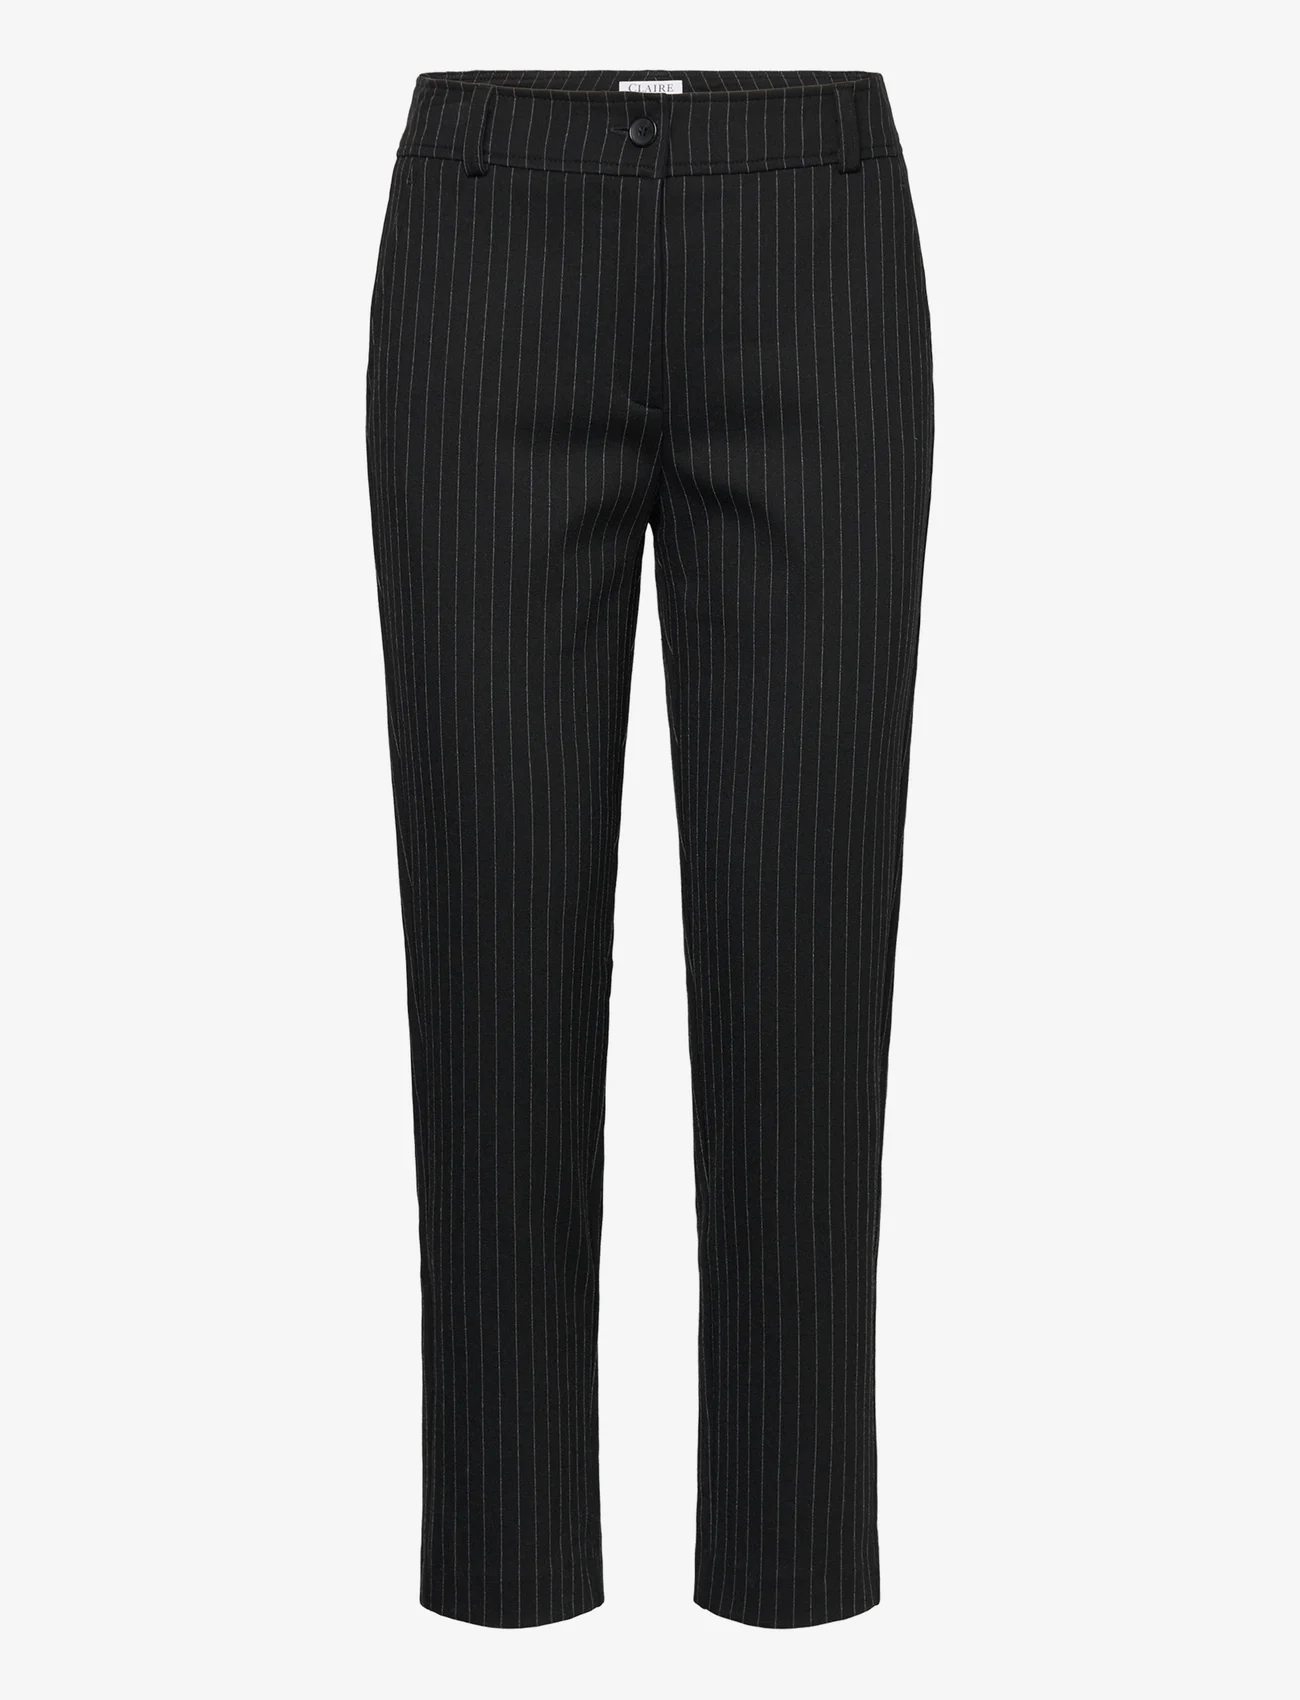 Claire Woman - Teja-CW - Bukser - tailored trousers - black - 0